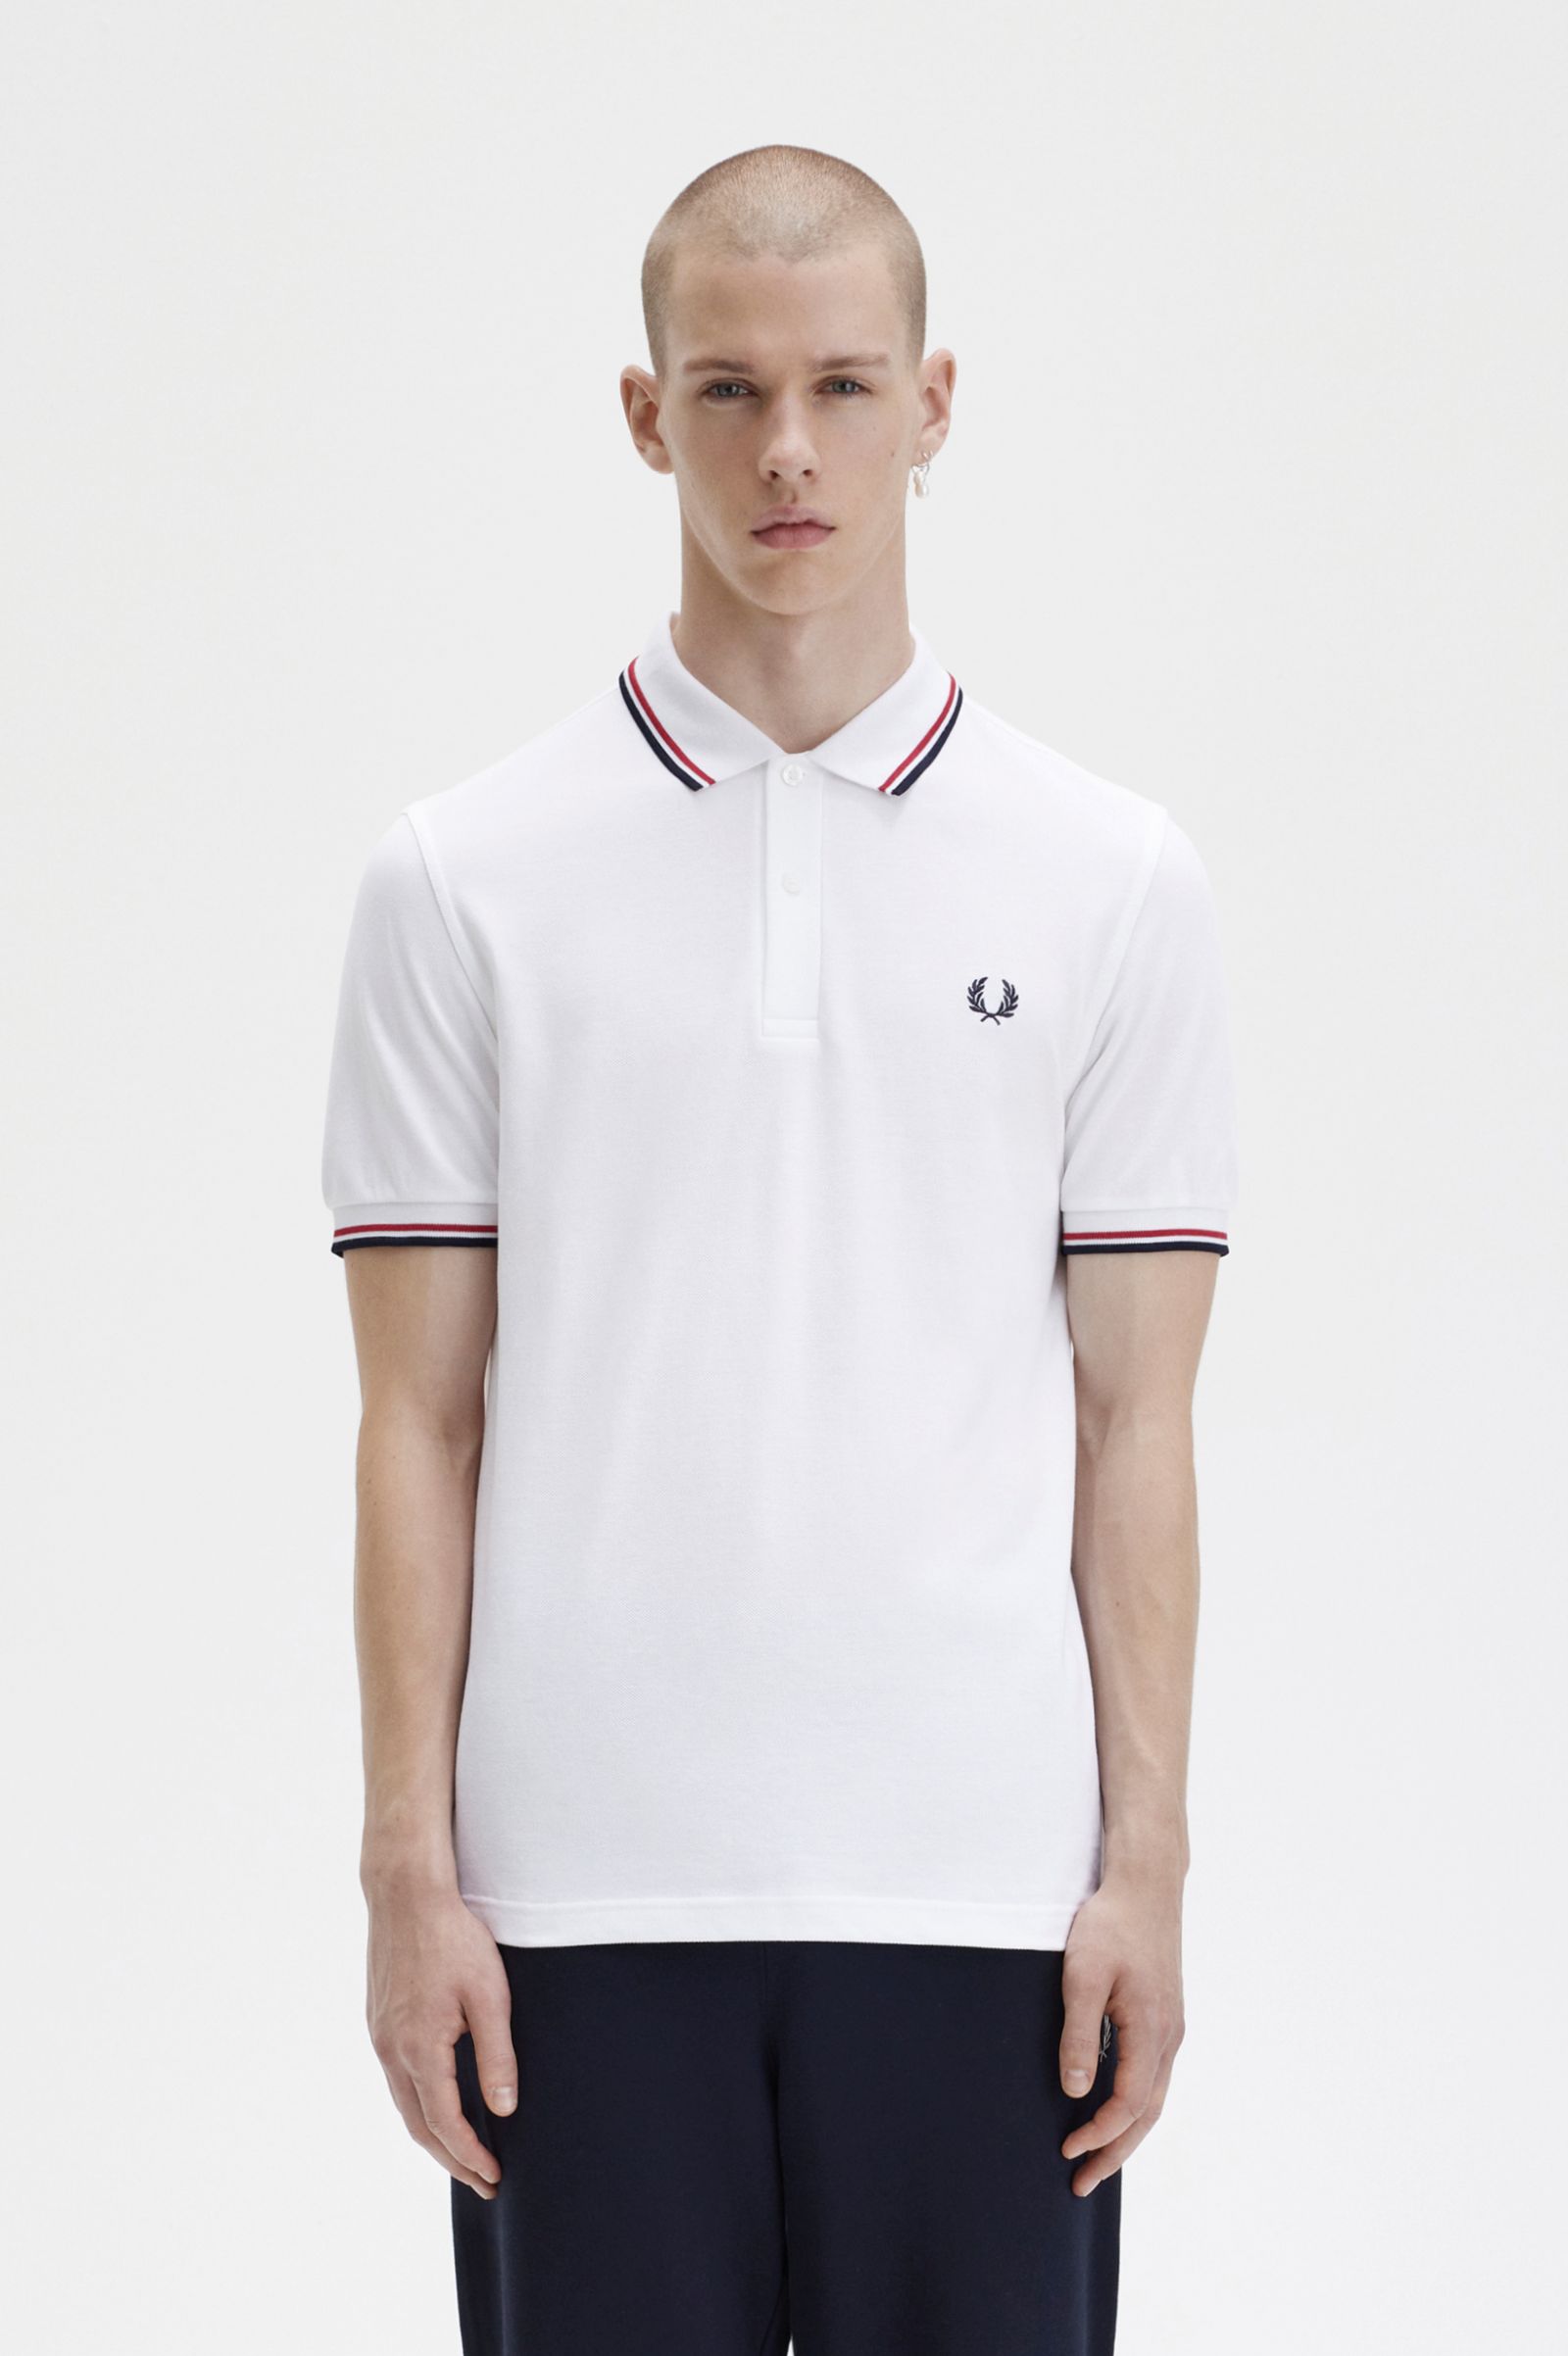 naaimachine de elite Moedig aan M3600 - White / Bright Red / Navy | The Fred Perry Shirt | Men's Short &  Long Sleeve Shirts | Fred Perry UK